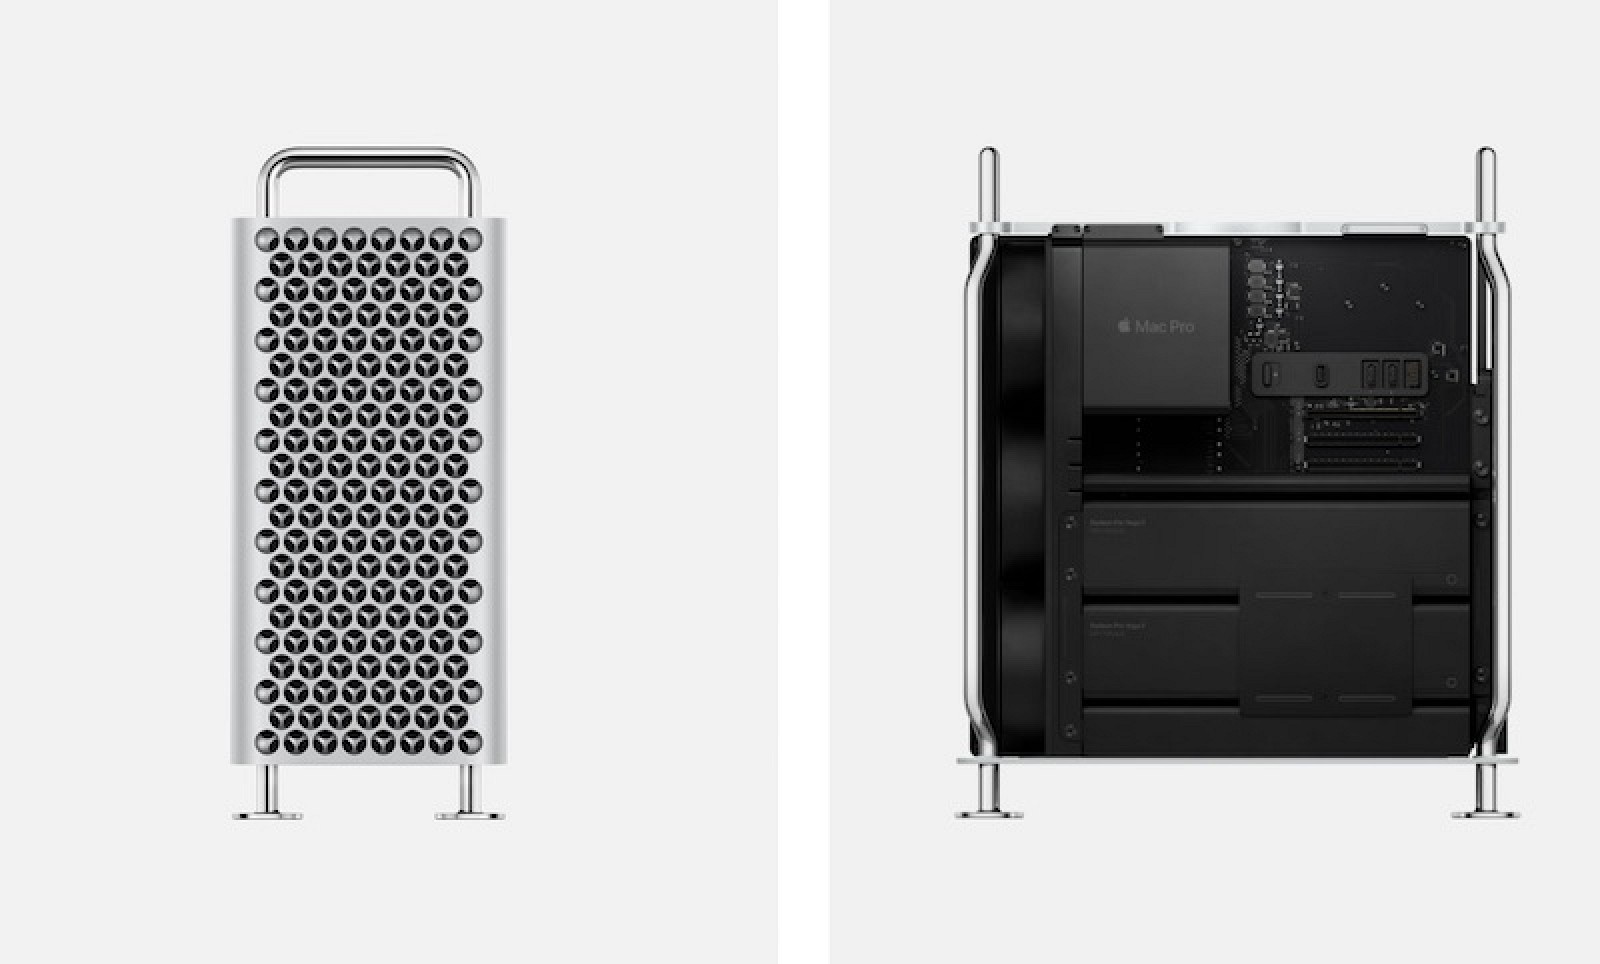 Apple's New Mac Pro Won't Be 'Made in USA' as Production Reportedly Moving to China